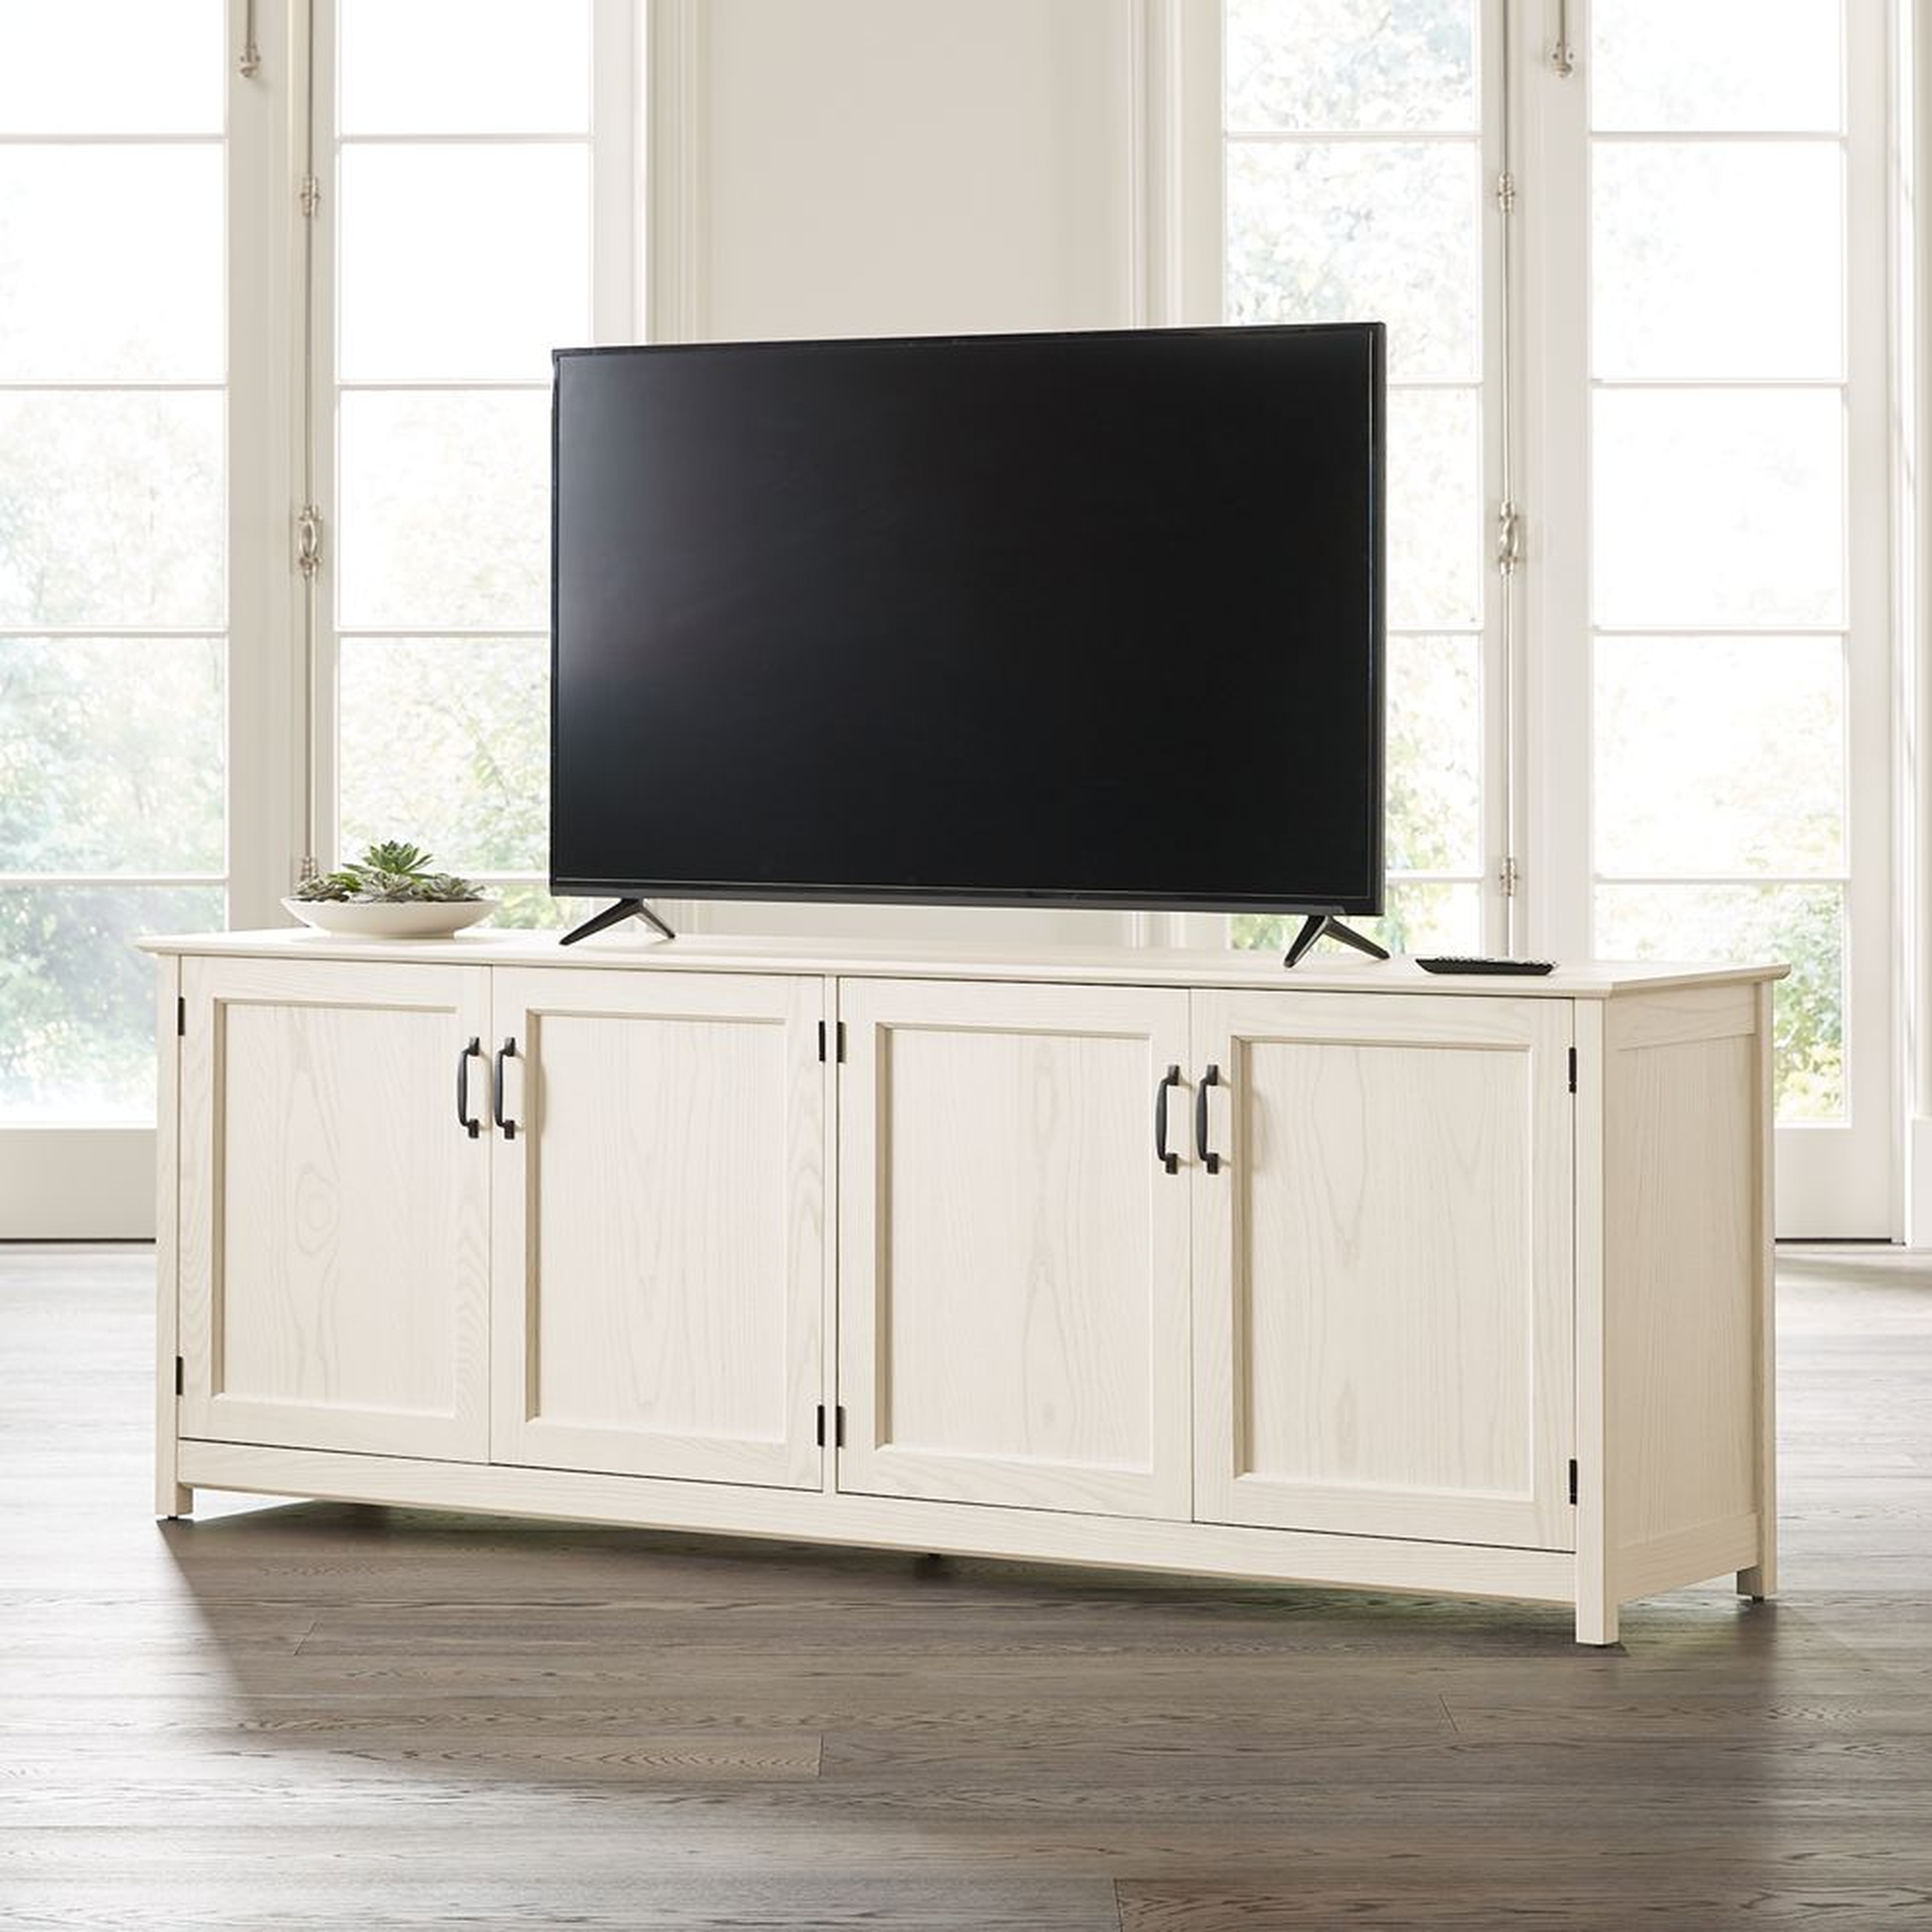 Ainsworth Cream 85" Media Console with Glass/Wood Doors - Crate and Barrel